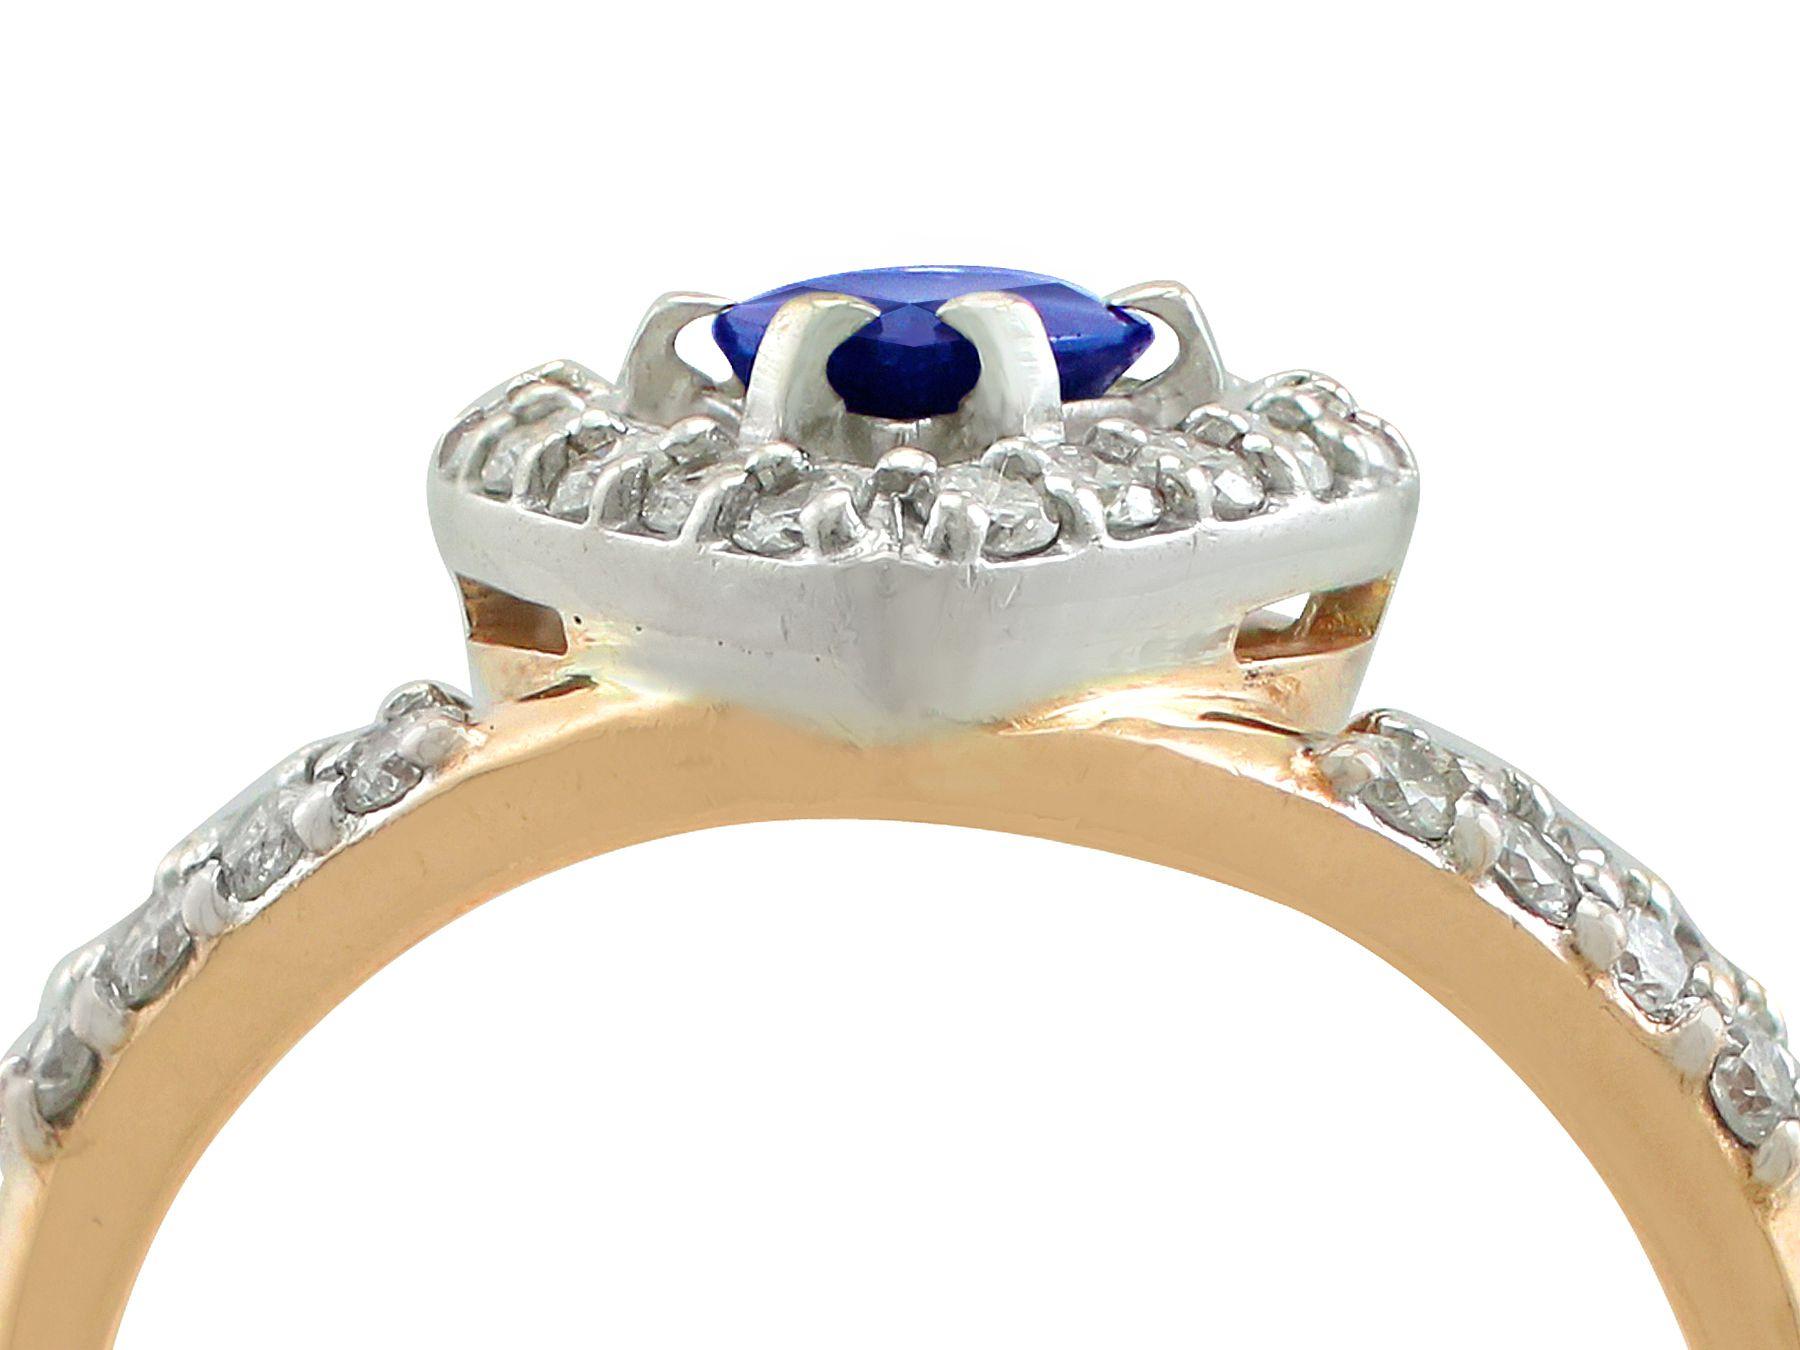 An impressive contemporary Russian 0.75 carat sapphire and 0.68 carat diamond, 14k yellow and white gold cocktail ring; part of our diverse antique jewelry collections.

This fine and impressive pear cut sapphire ring has been crafted in 14k yellow